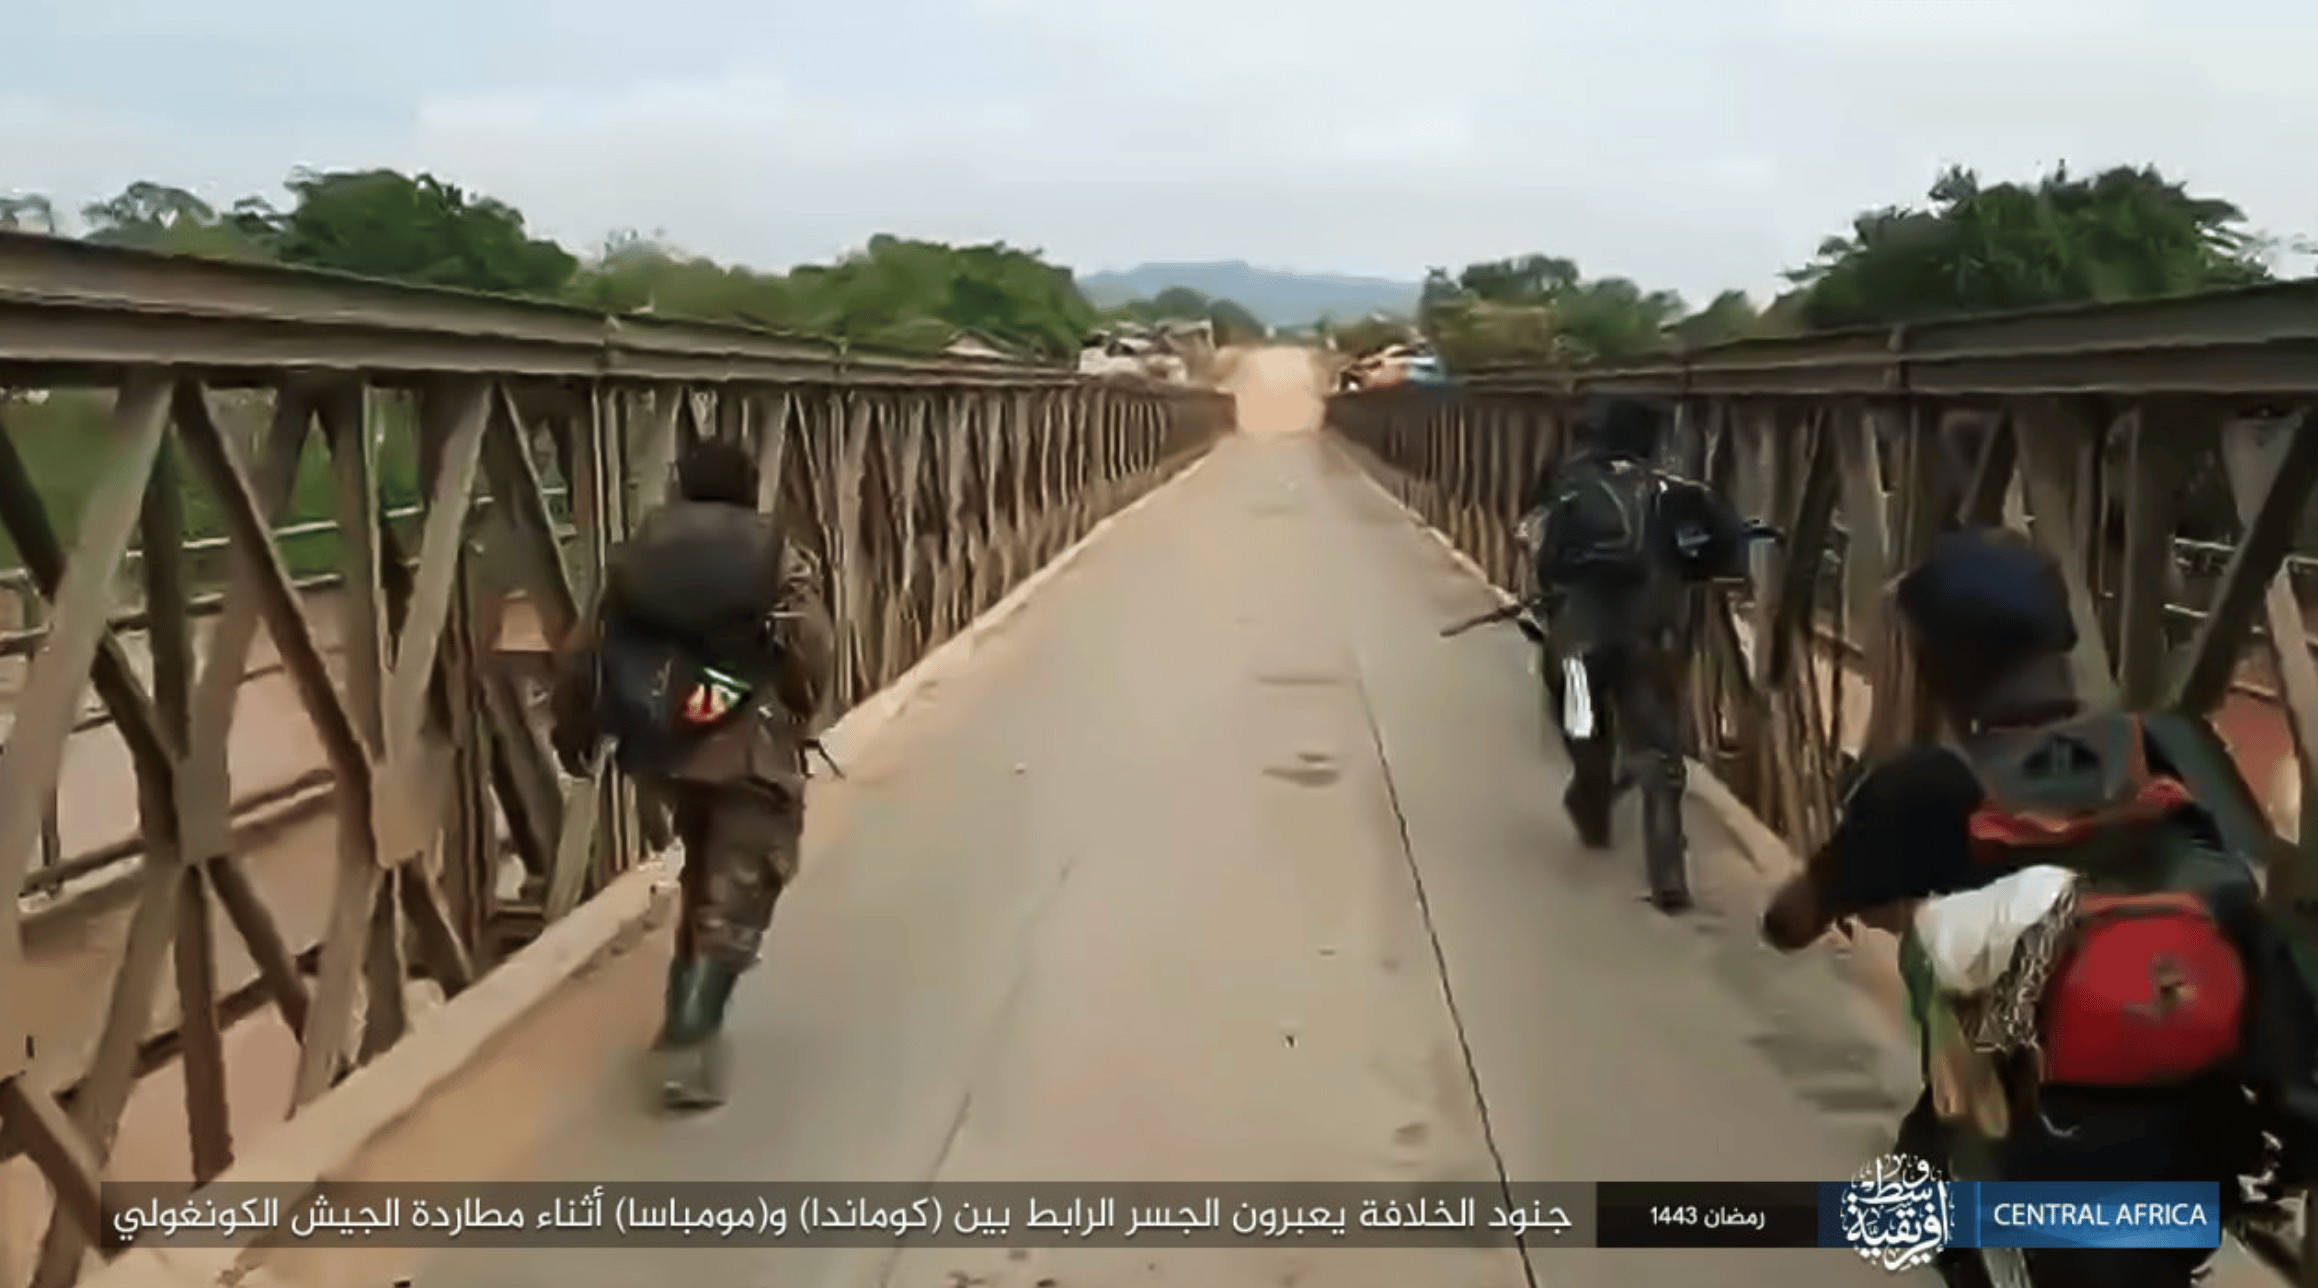 Islamic State Central Africa (ISCA/ISCAP): Remnants Of The Congolese Army Were Attacked With Automatic Weapons After They Fled From The Village Of Mangusu, They Continued to Flee And The Militants Burned A Truck And A Christian Shop, The Bridge Linking The Towns Of Komanda And Mombasa, North Kivu Province, Congo (DRC)